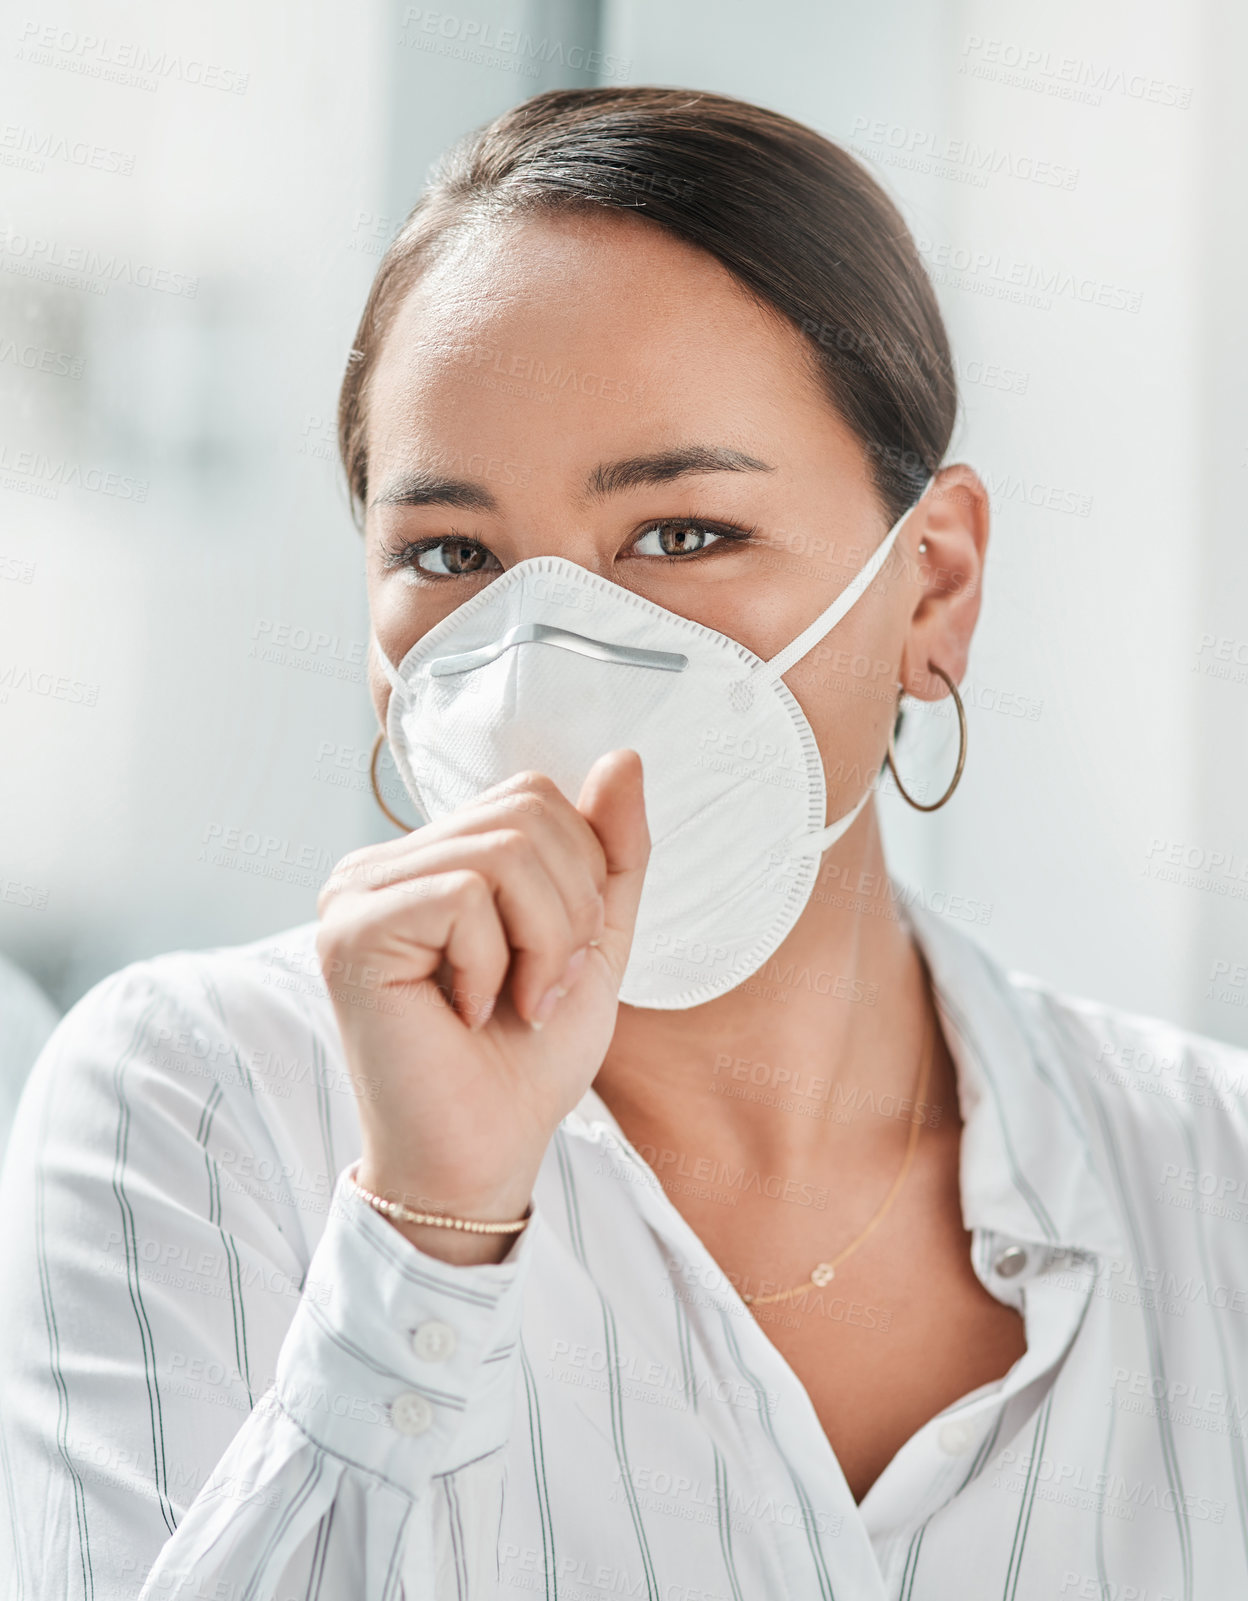 Buy stock photo Shot of a masked young businesswoman coughing in a modern office